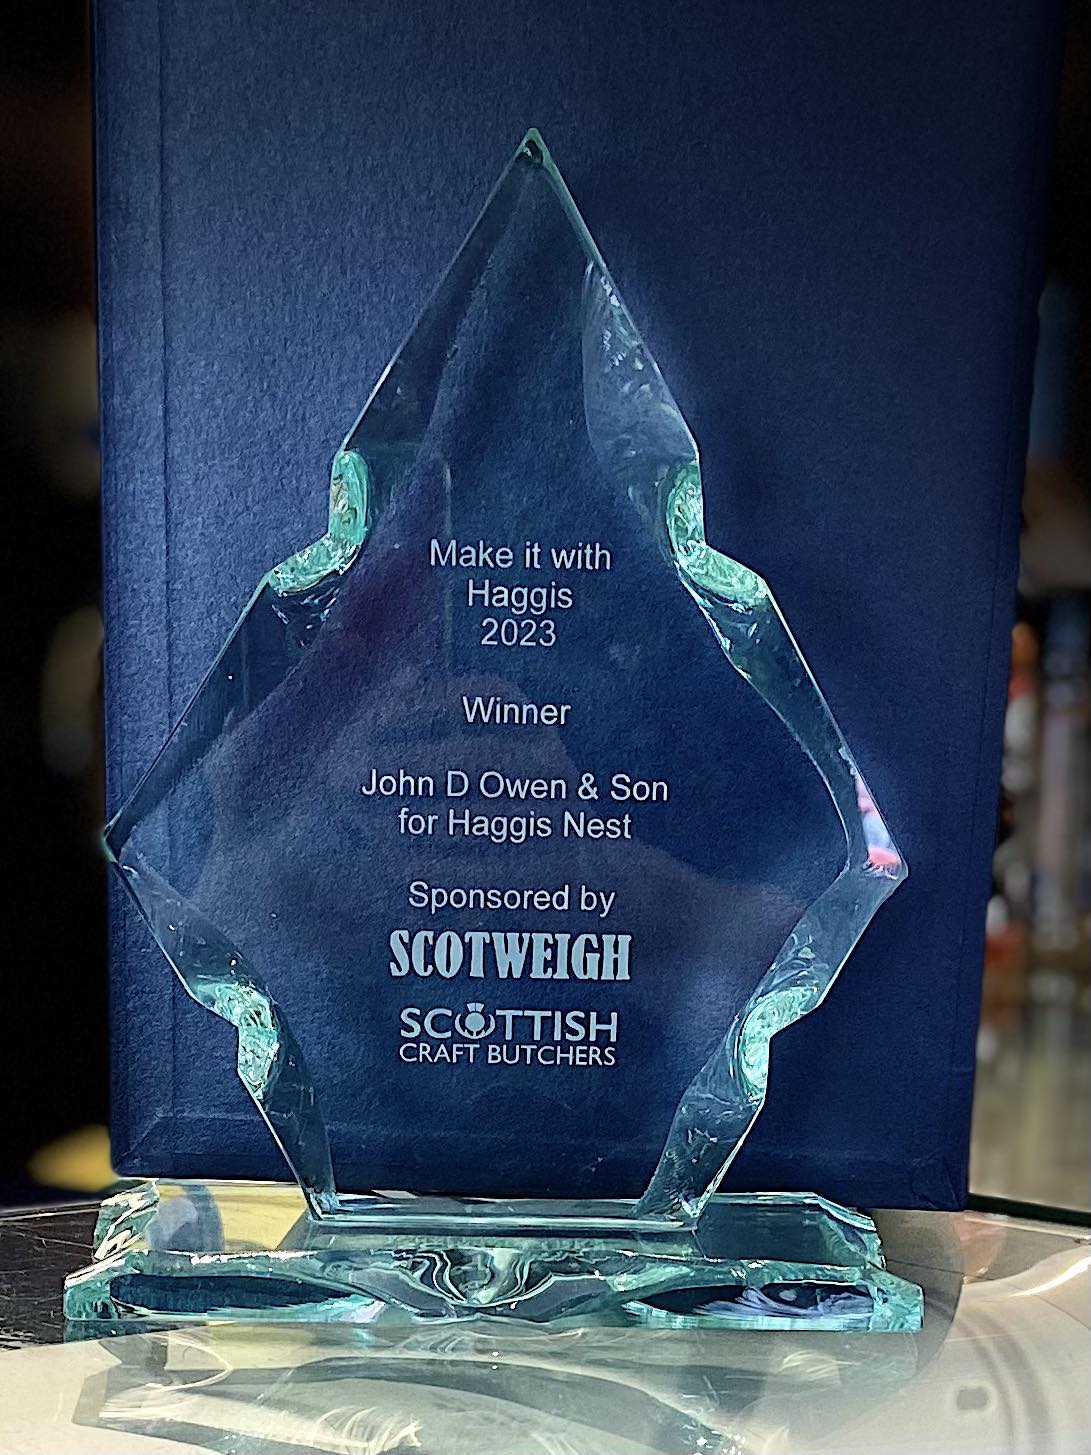 Awards won in 2018-19 by John D Owen butchers Newton Stewart include the Scottish Craft Butcher Beefburger Award and the Bacon & Bacon Produce Award